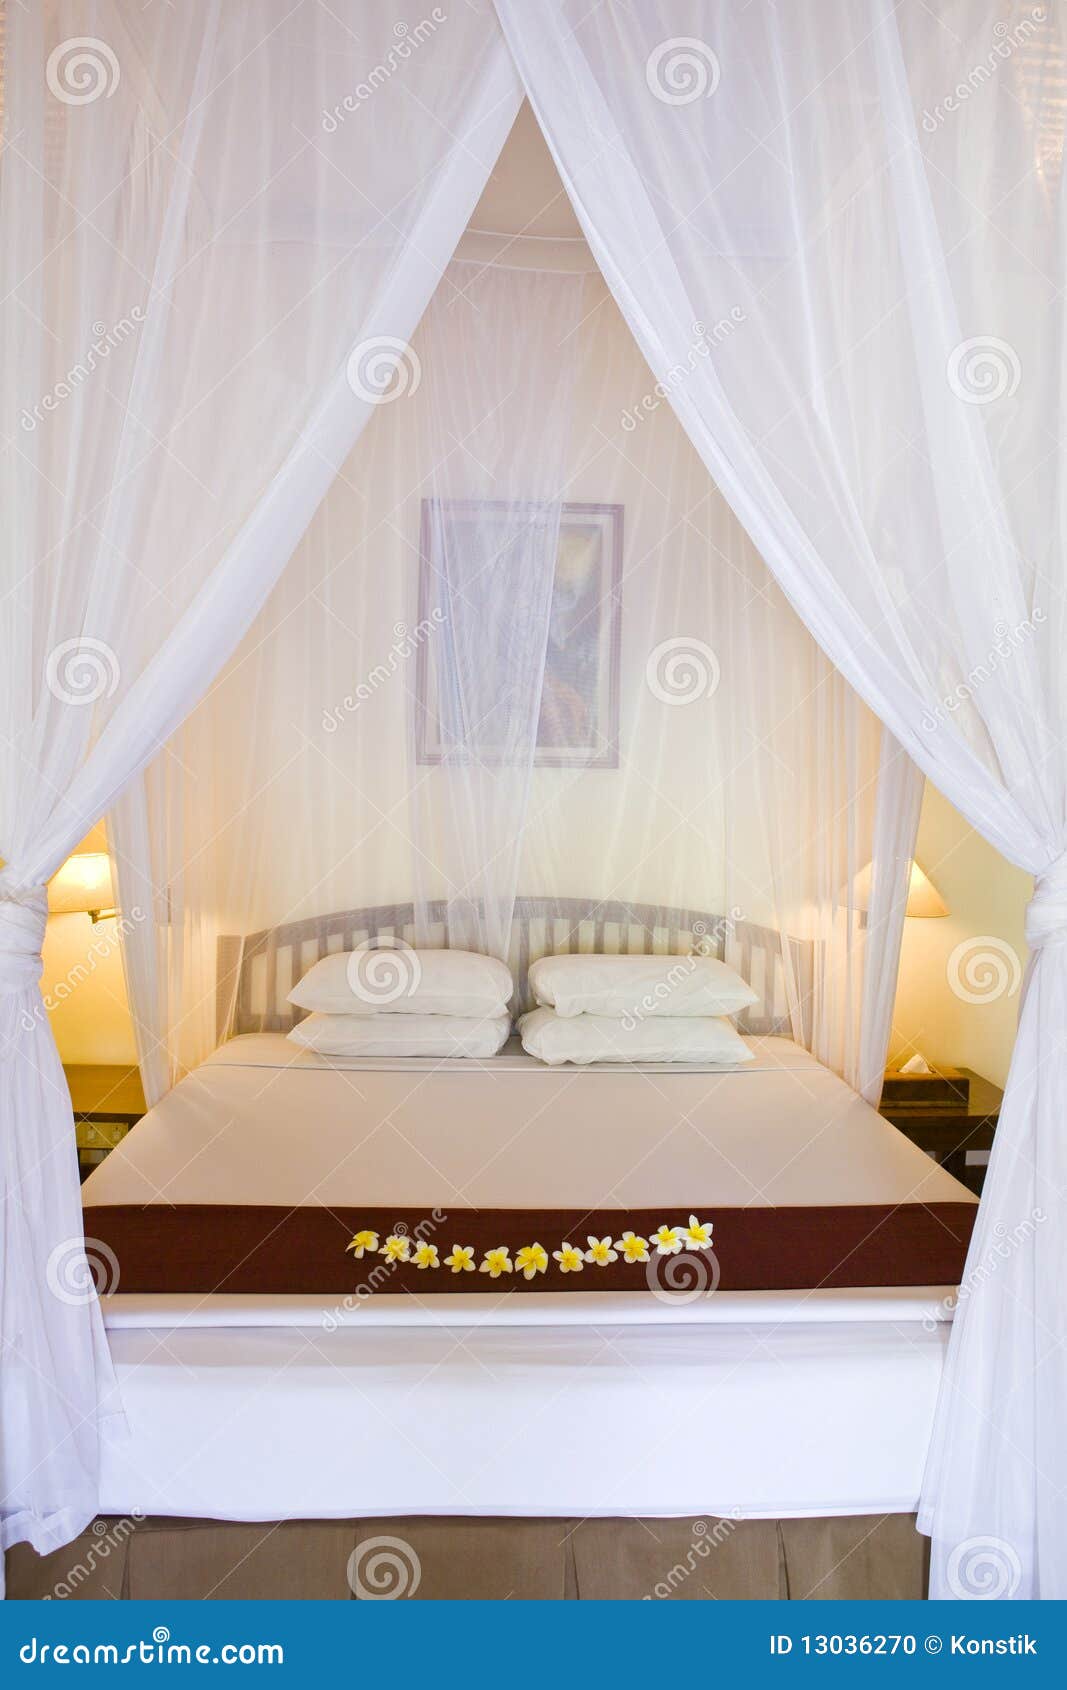 Bed Under Bed Curtains Stock Photo - Image: 13036270